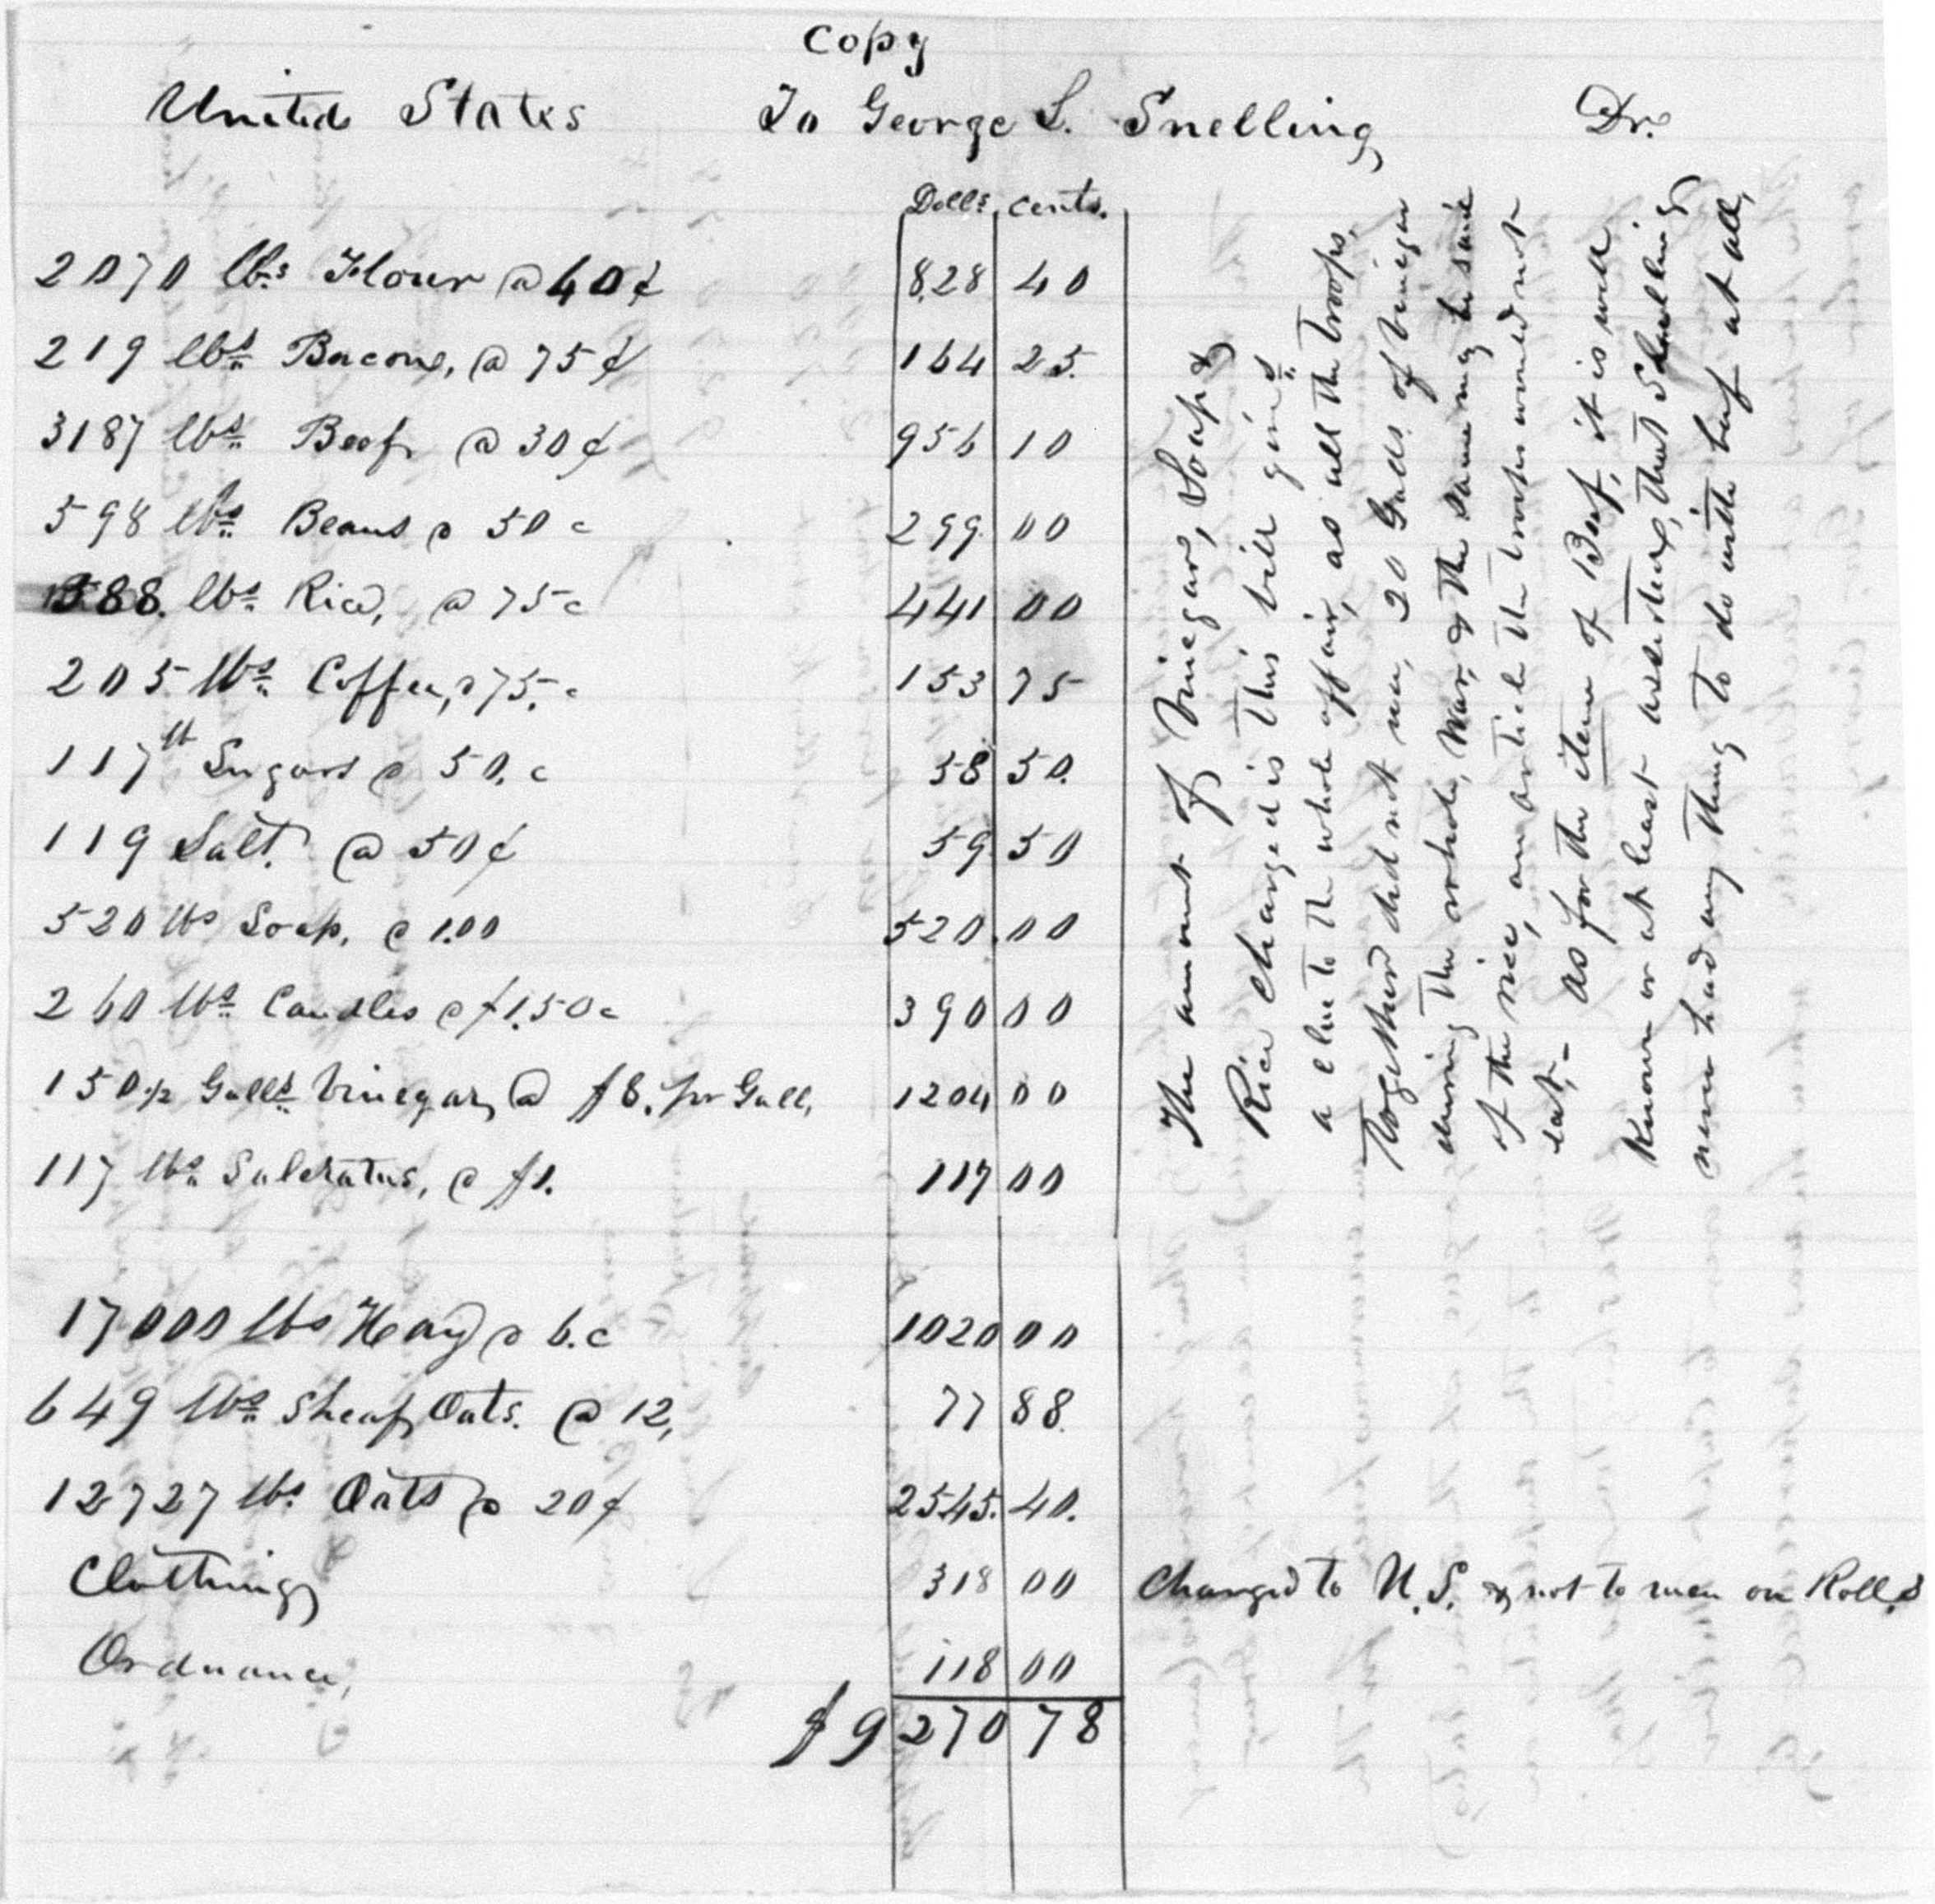 Goodall's accounting, Snelling's division, 1855 Rogue River Indian War